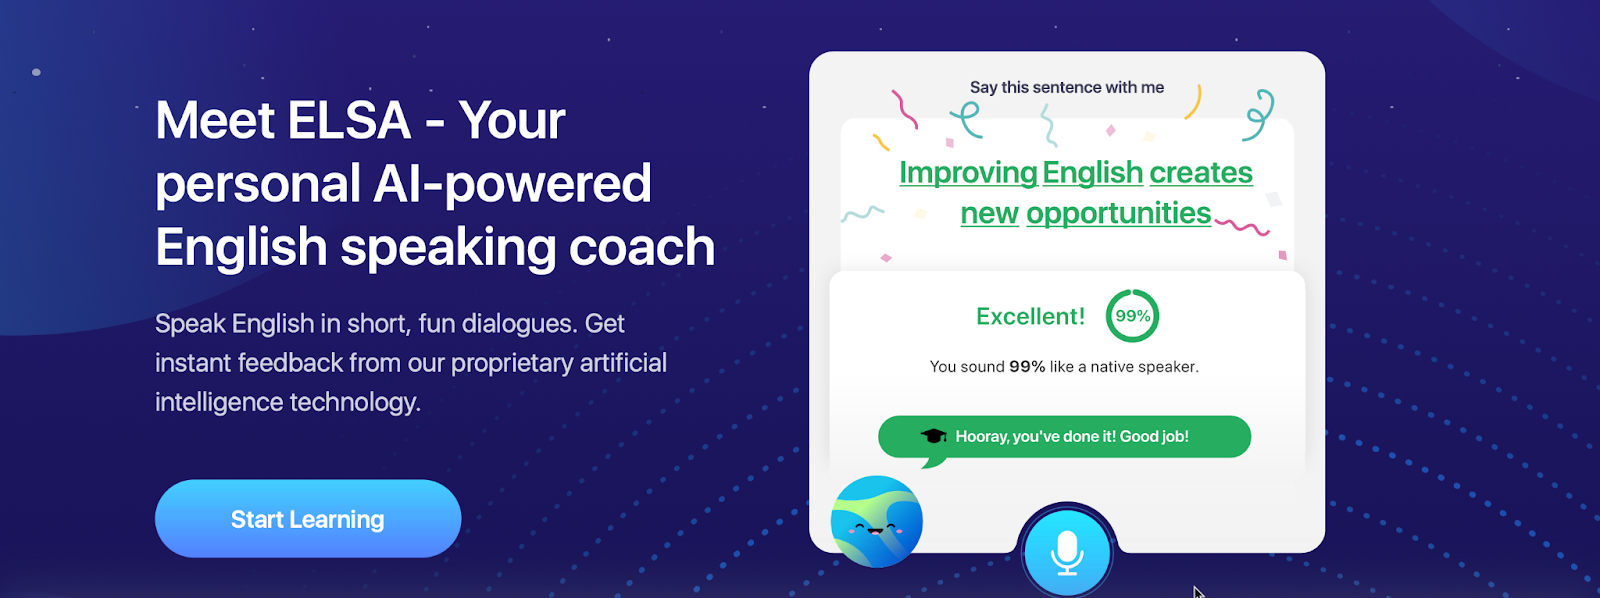 The homepage of ELS that state 'Meet ELSA - Your personal AI-powered English speaking coach'.